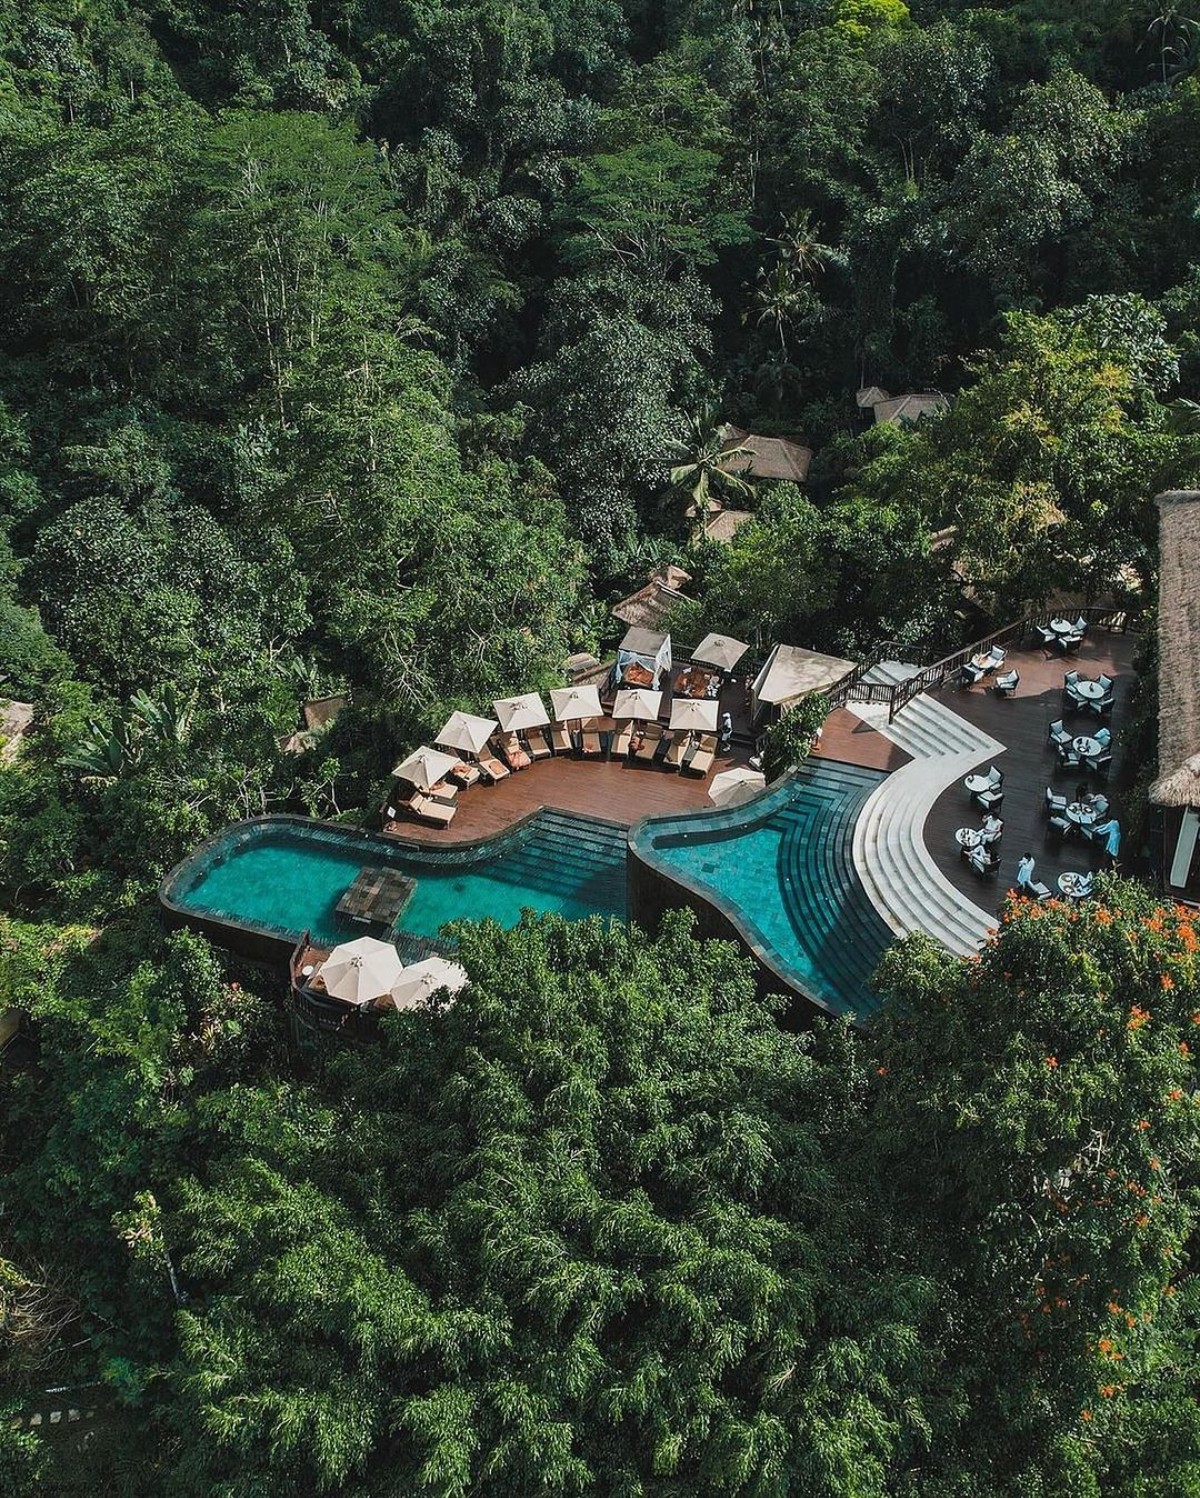 An aerial view of a pool embraced by thick greenery, with deck chairs and a jungle backdrop in Ubud, Bali.